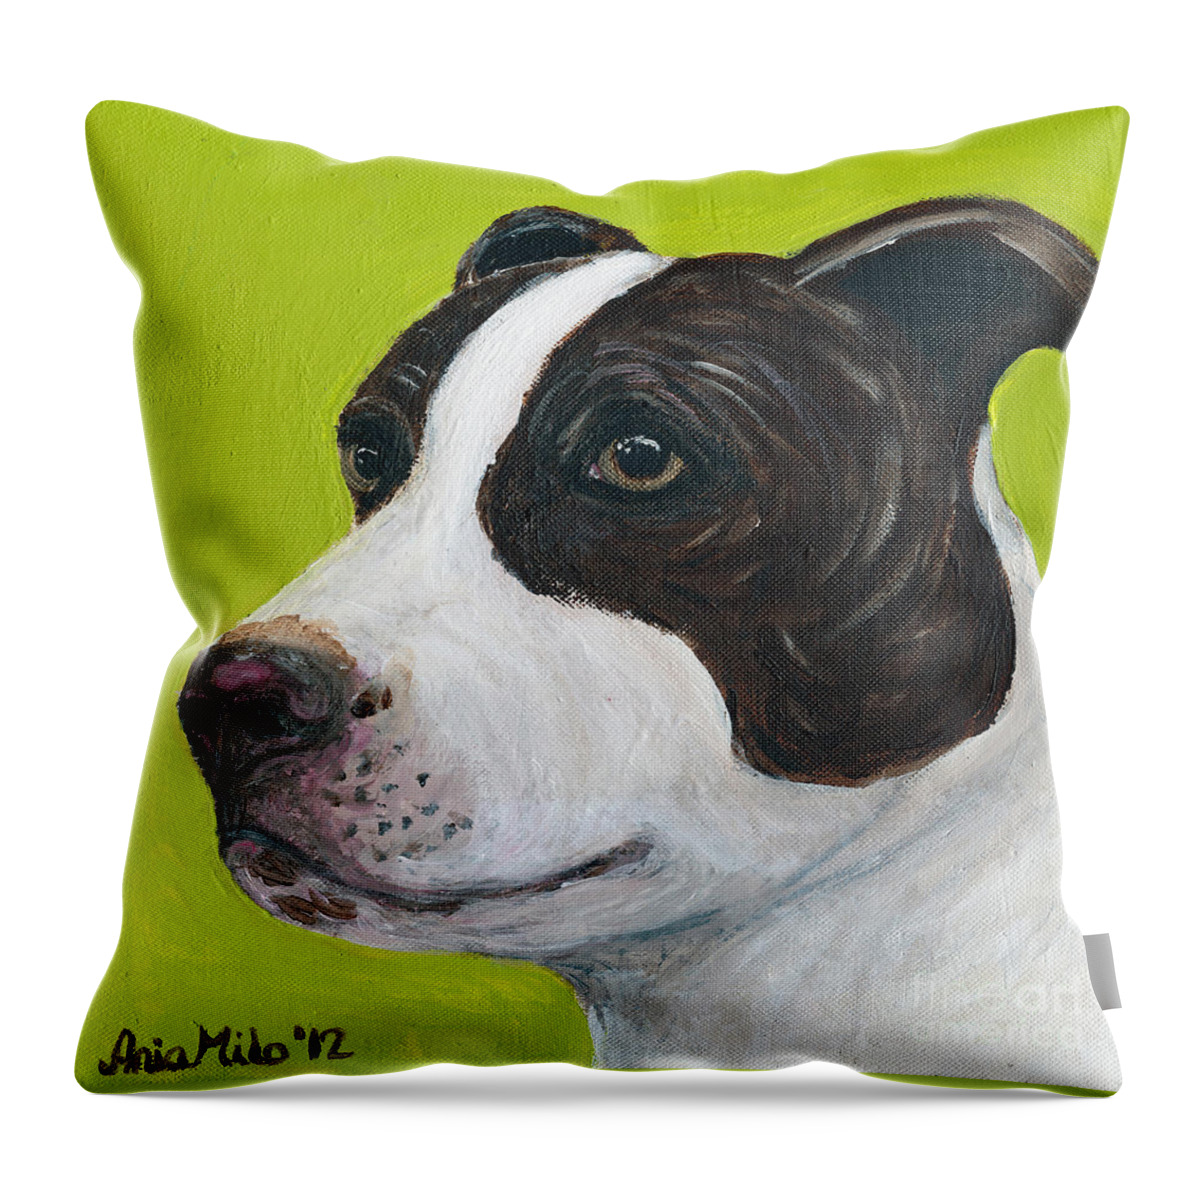 Pit Bull Throw Pillow featuring the painting Jethro on Green by Ania M Milo